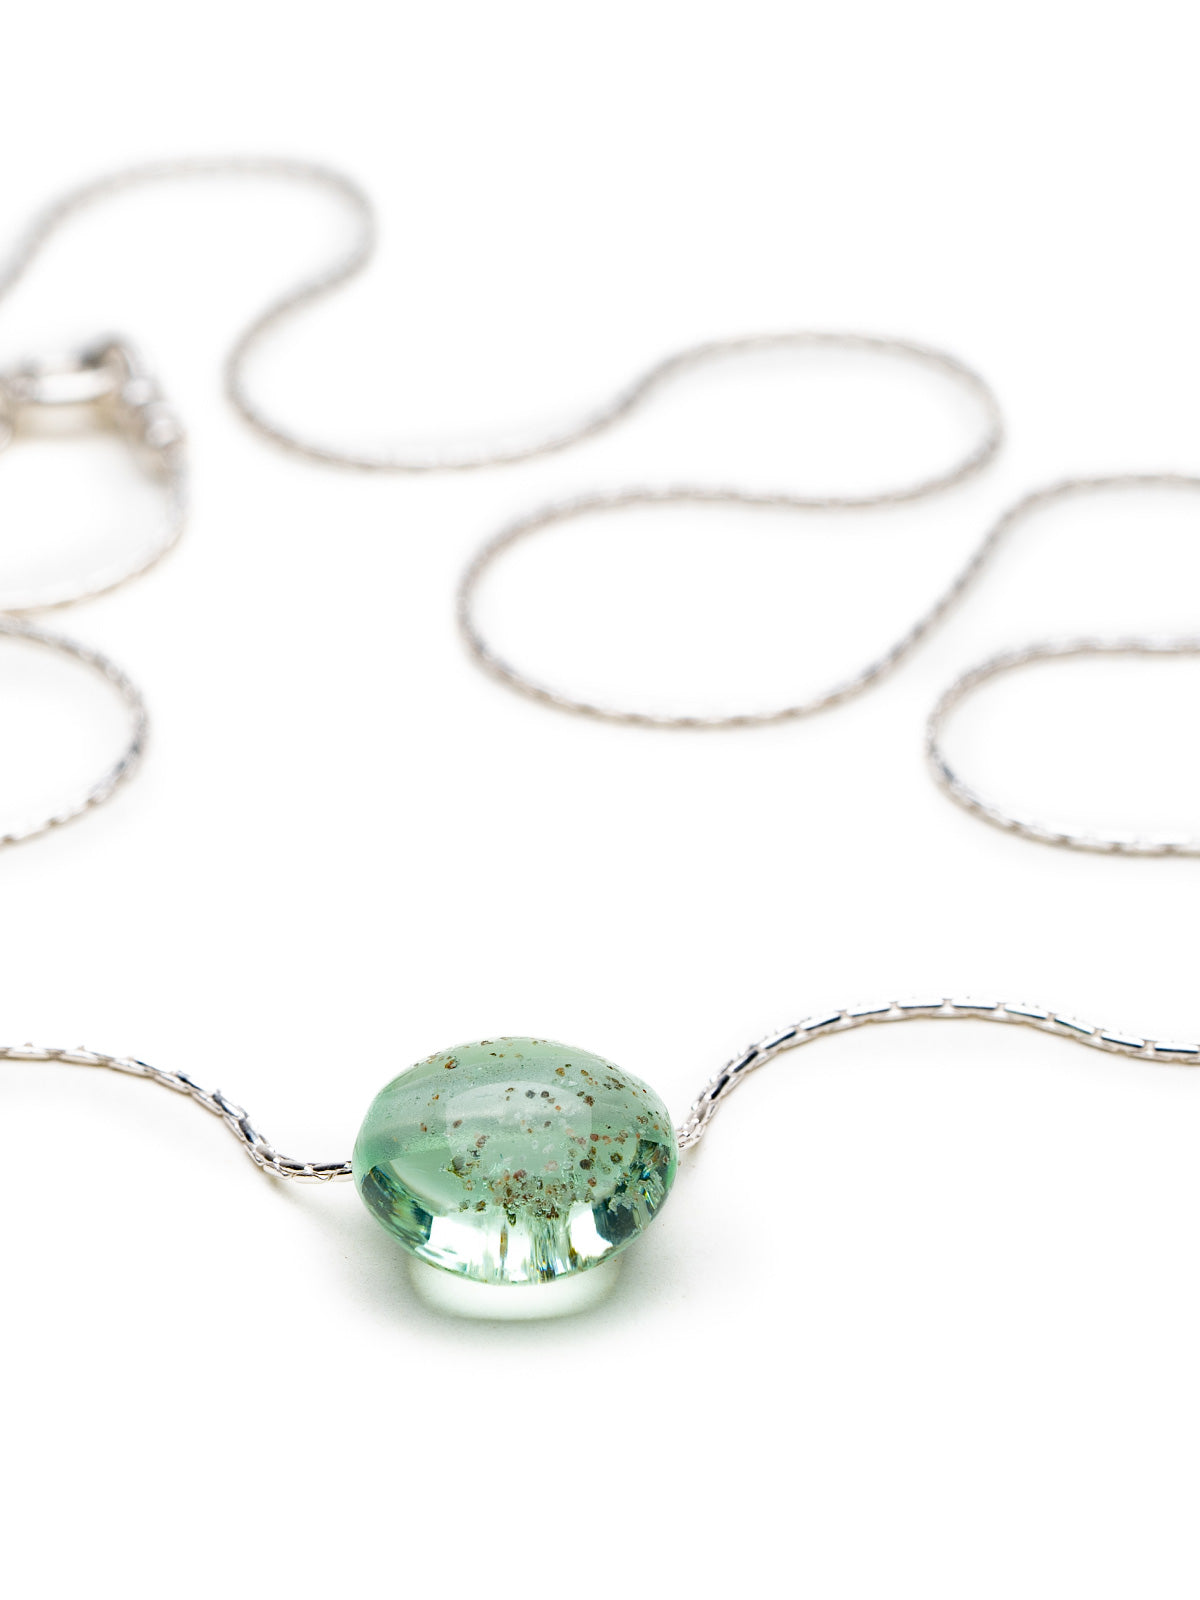 Pebble Necklace Pebble Pendant Natural Stone Seaside Jewellery Sterling  Silver Chain